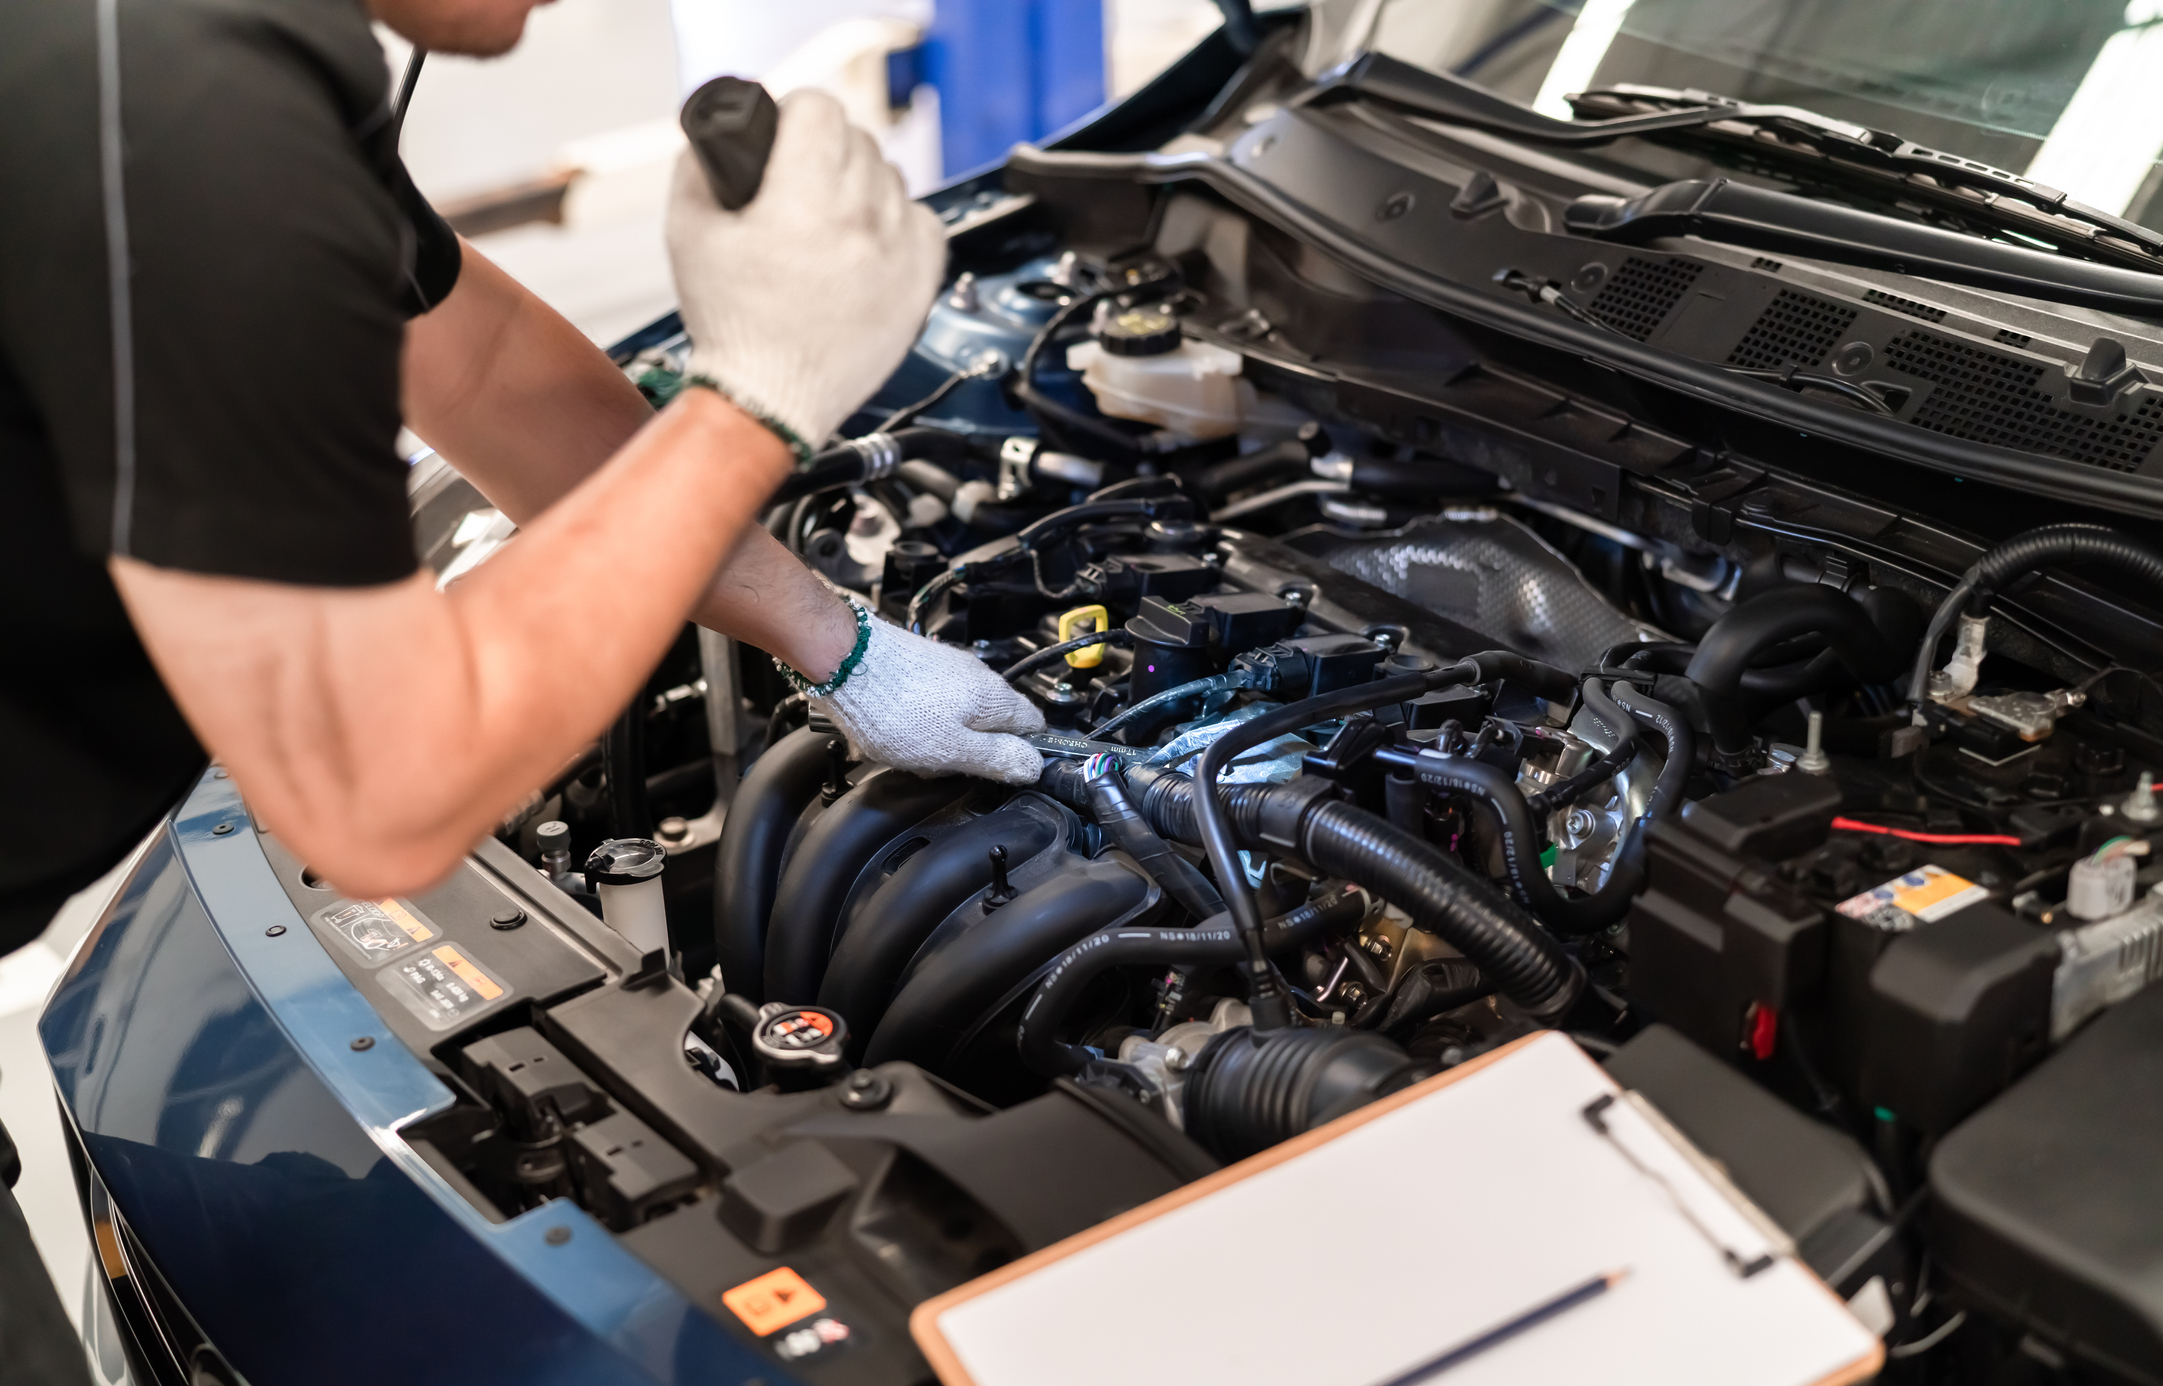 ASE-certified technicians at Scheller Automotive have the experience and equipment to fix any auto repair problems.